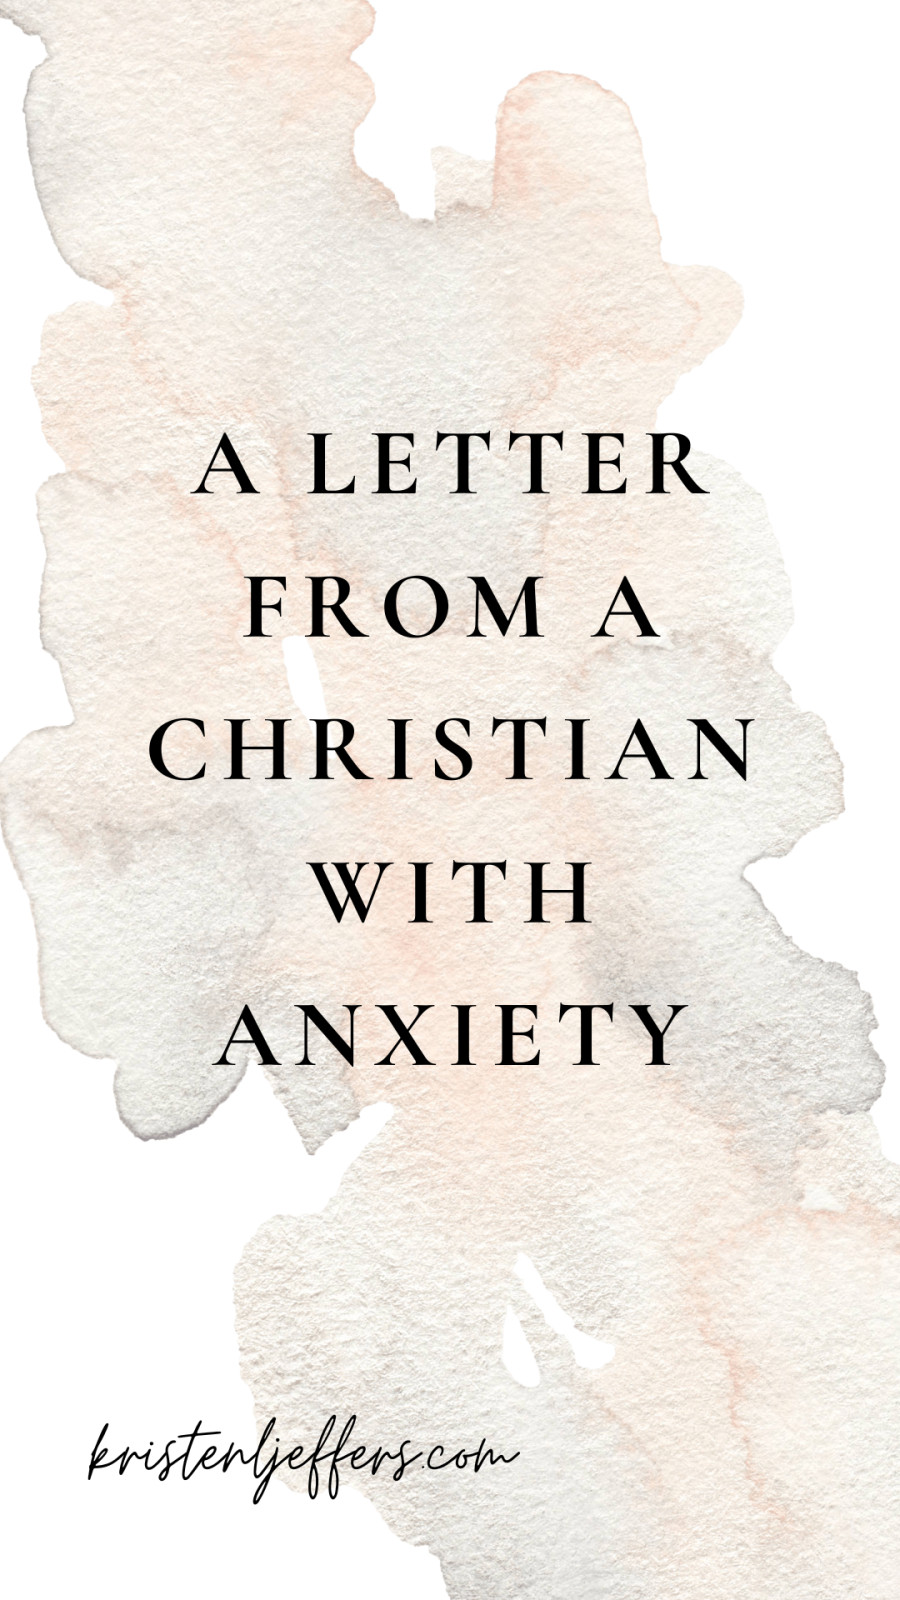 A Letter From a Christian with Anxiety